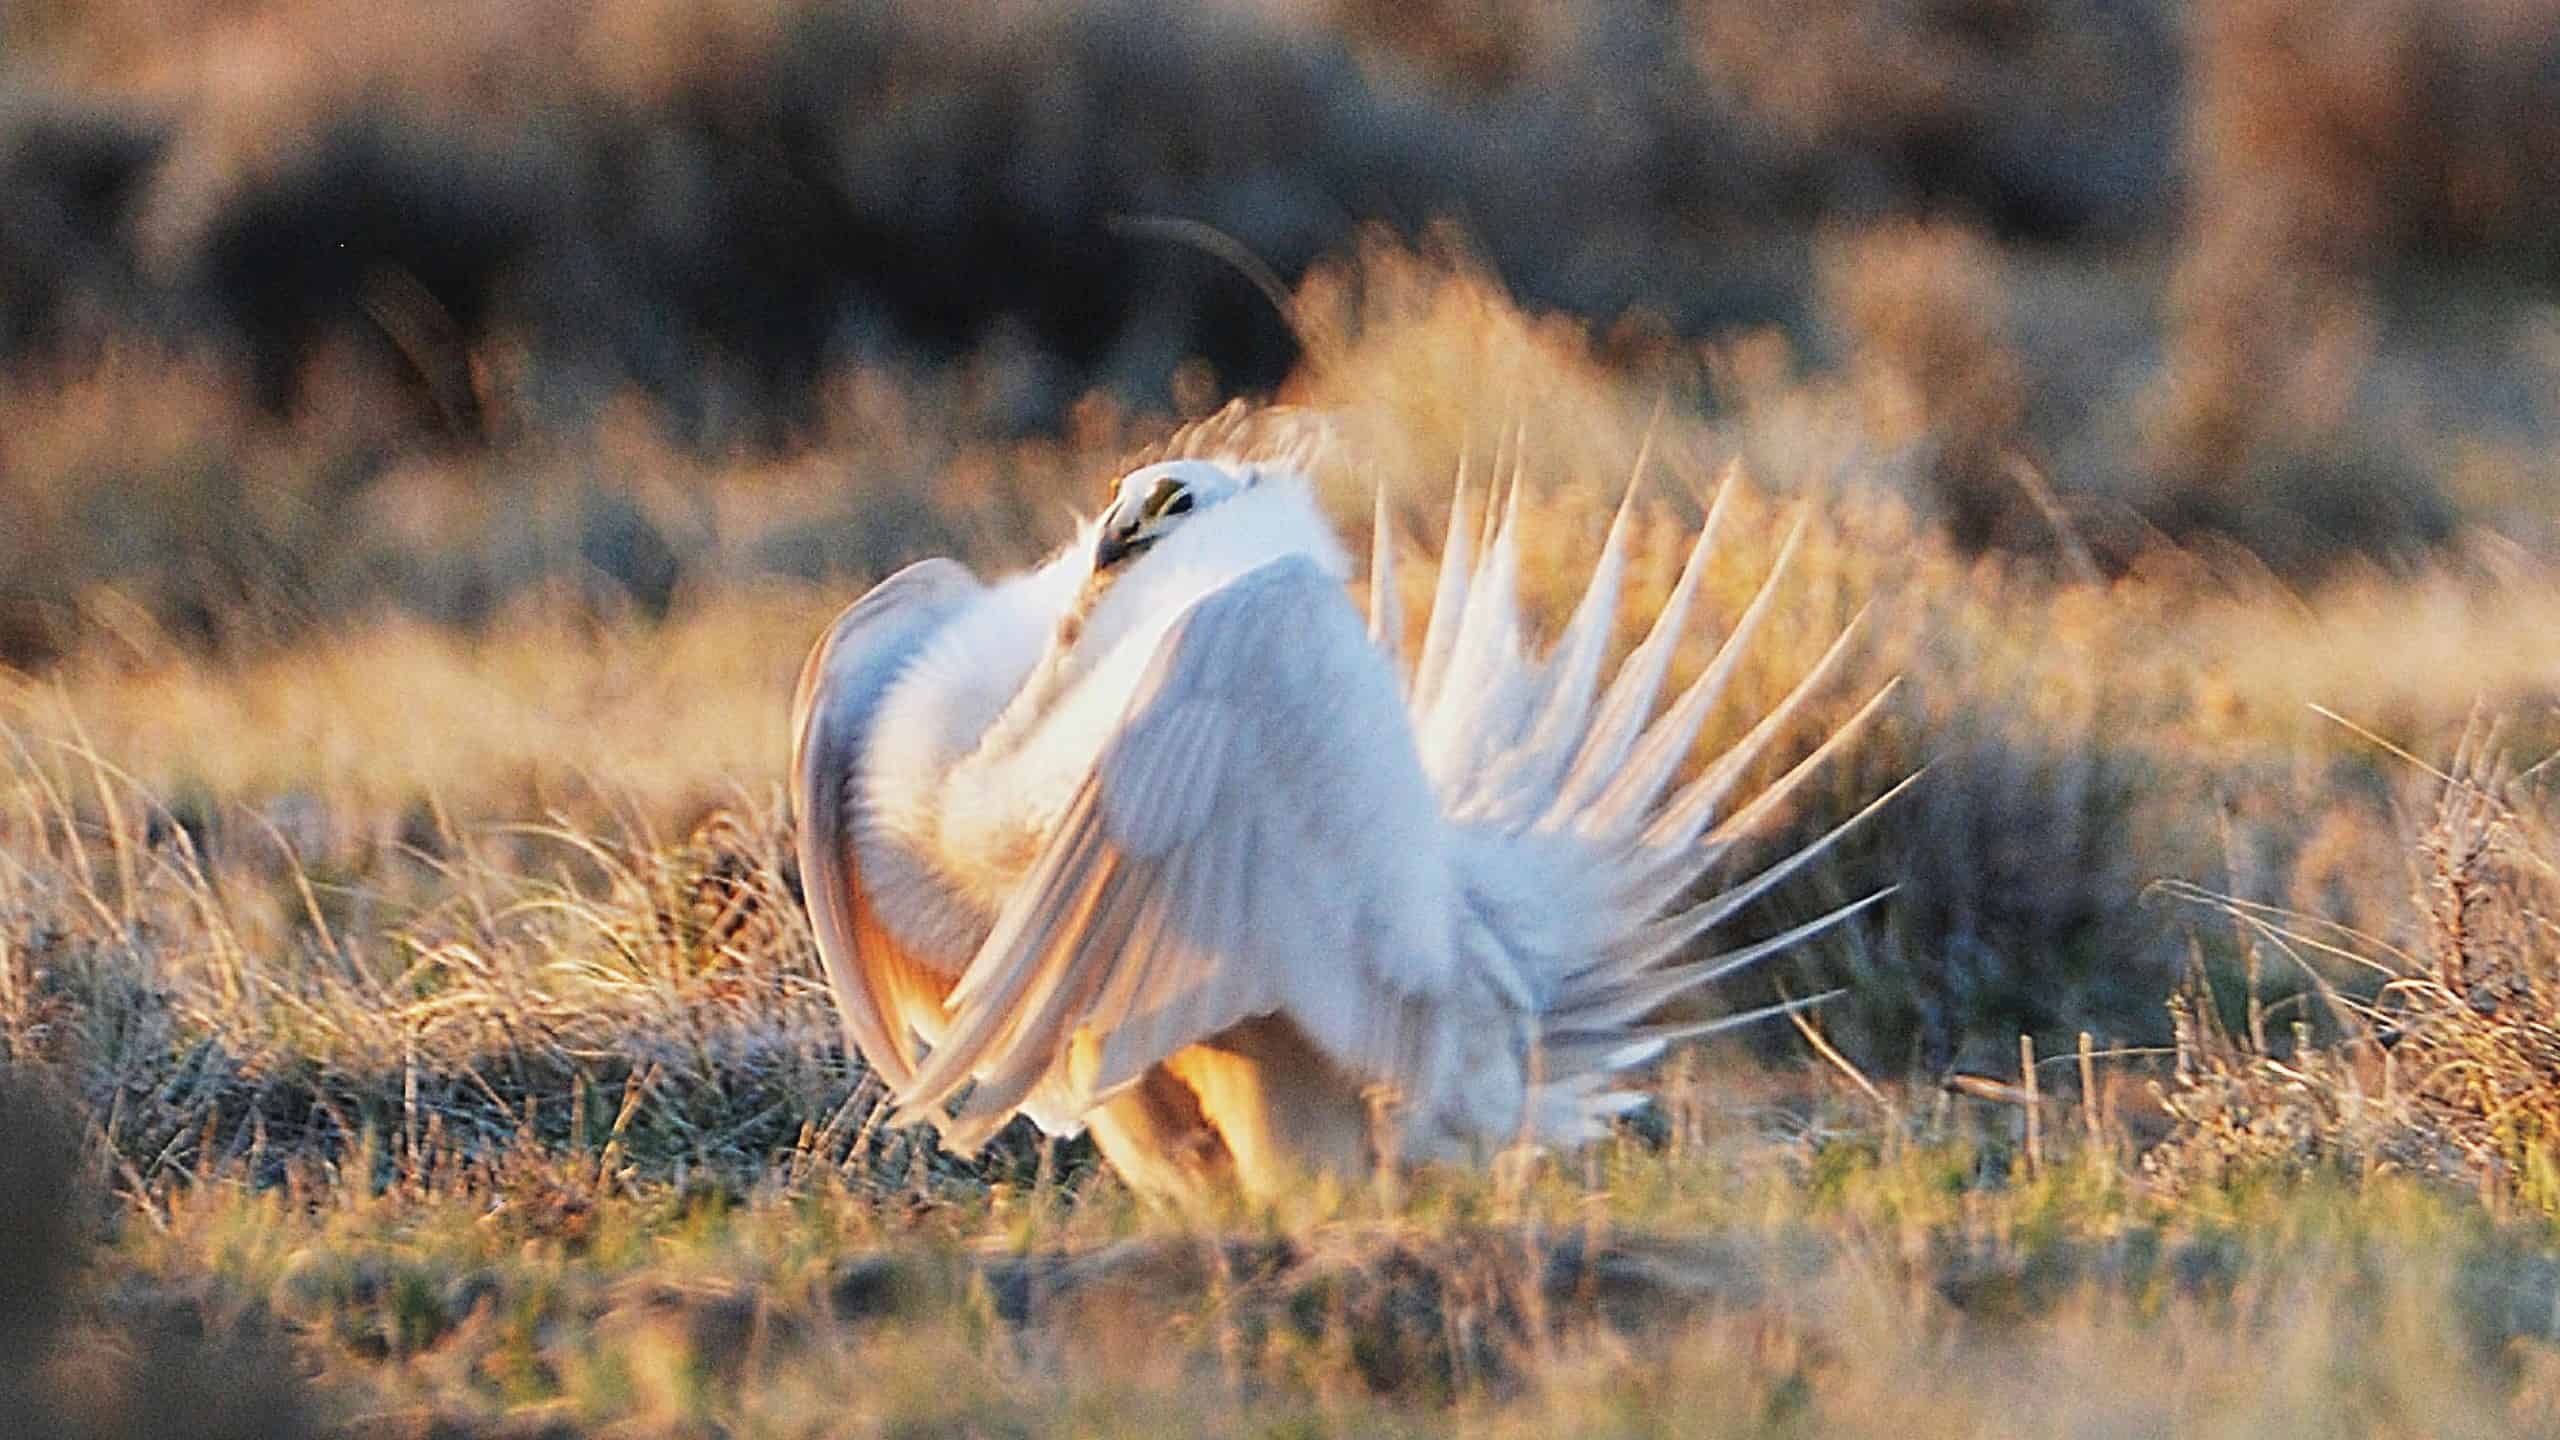 Photo of a rare white sage grouse in Wyoming by Tracie Fernandez.